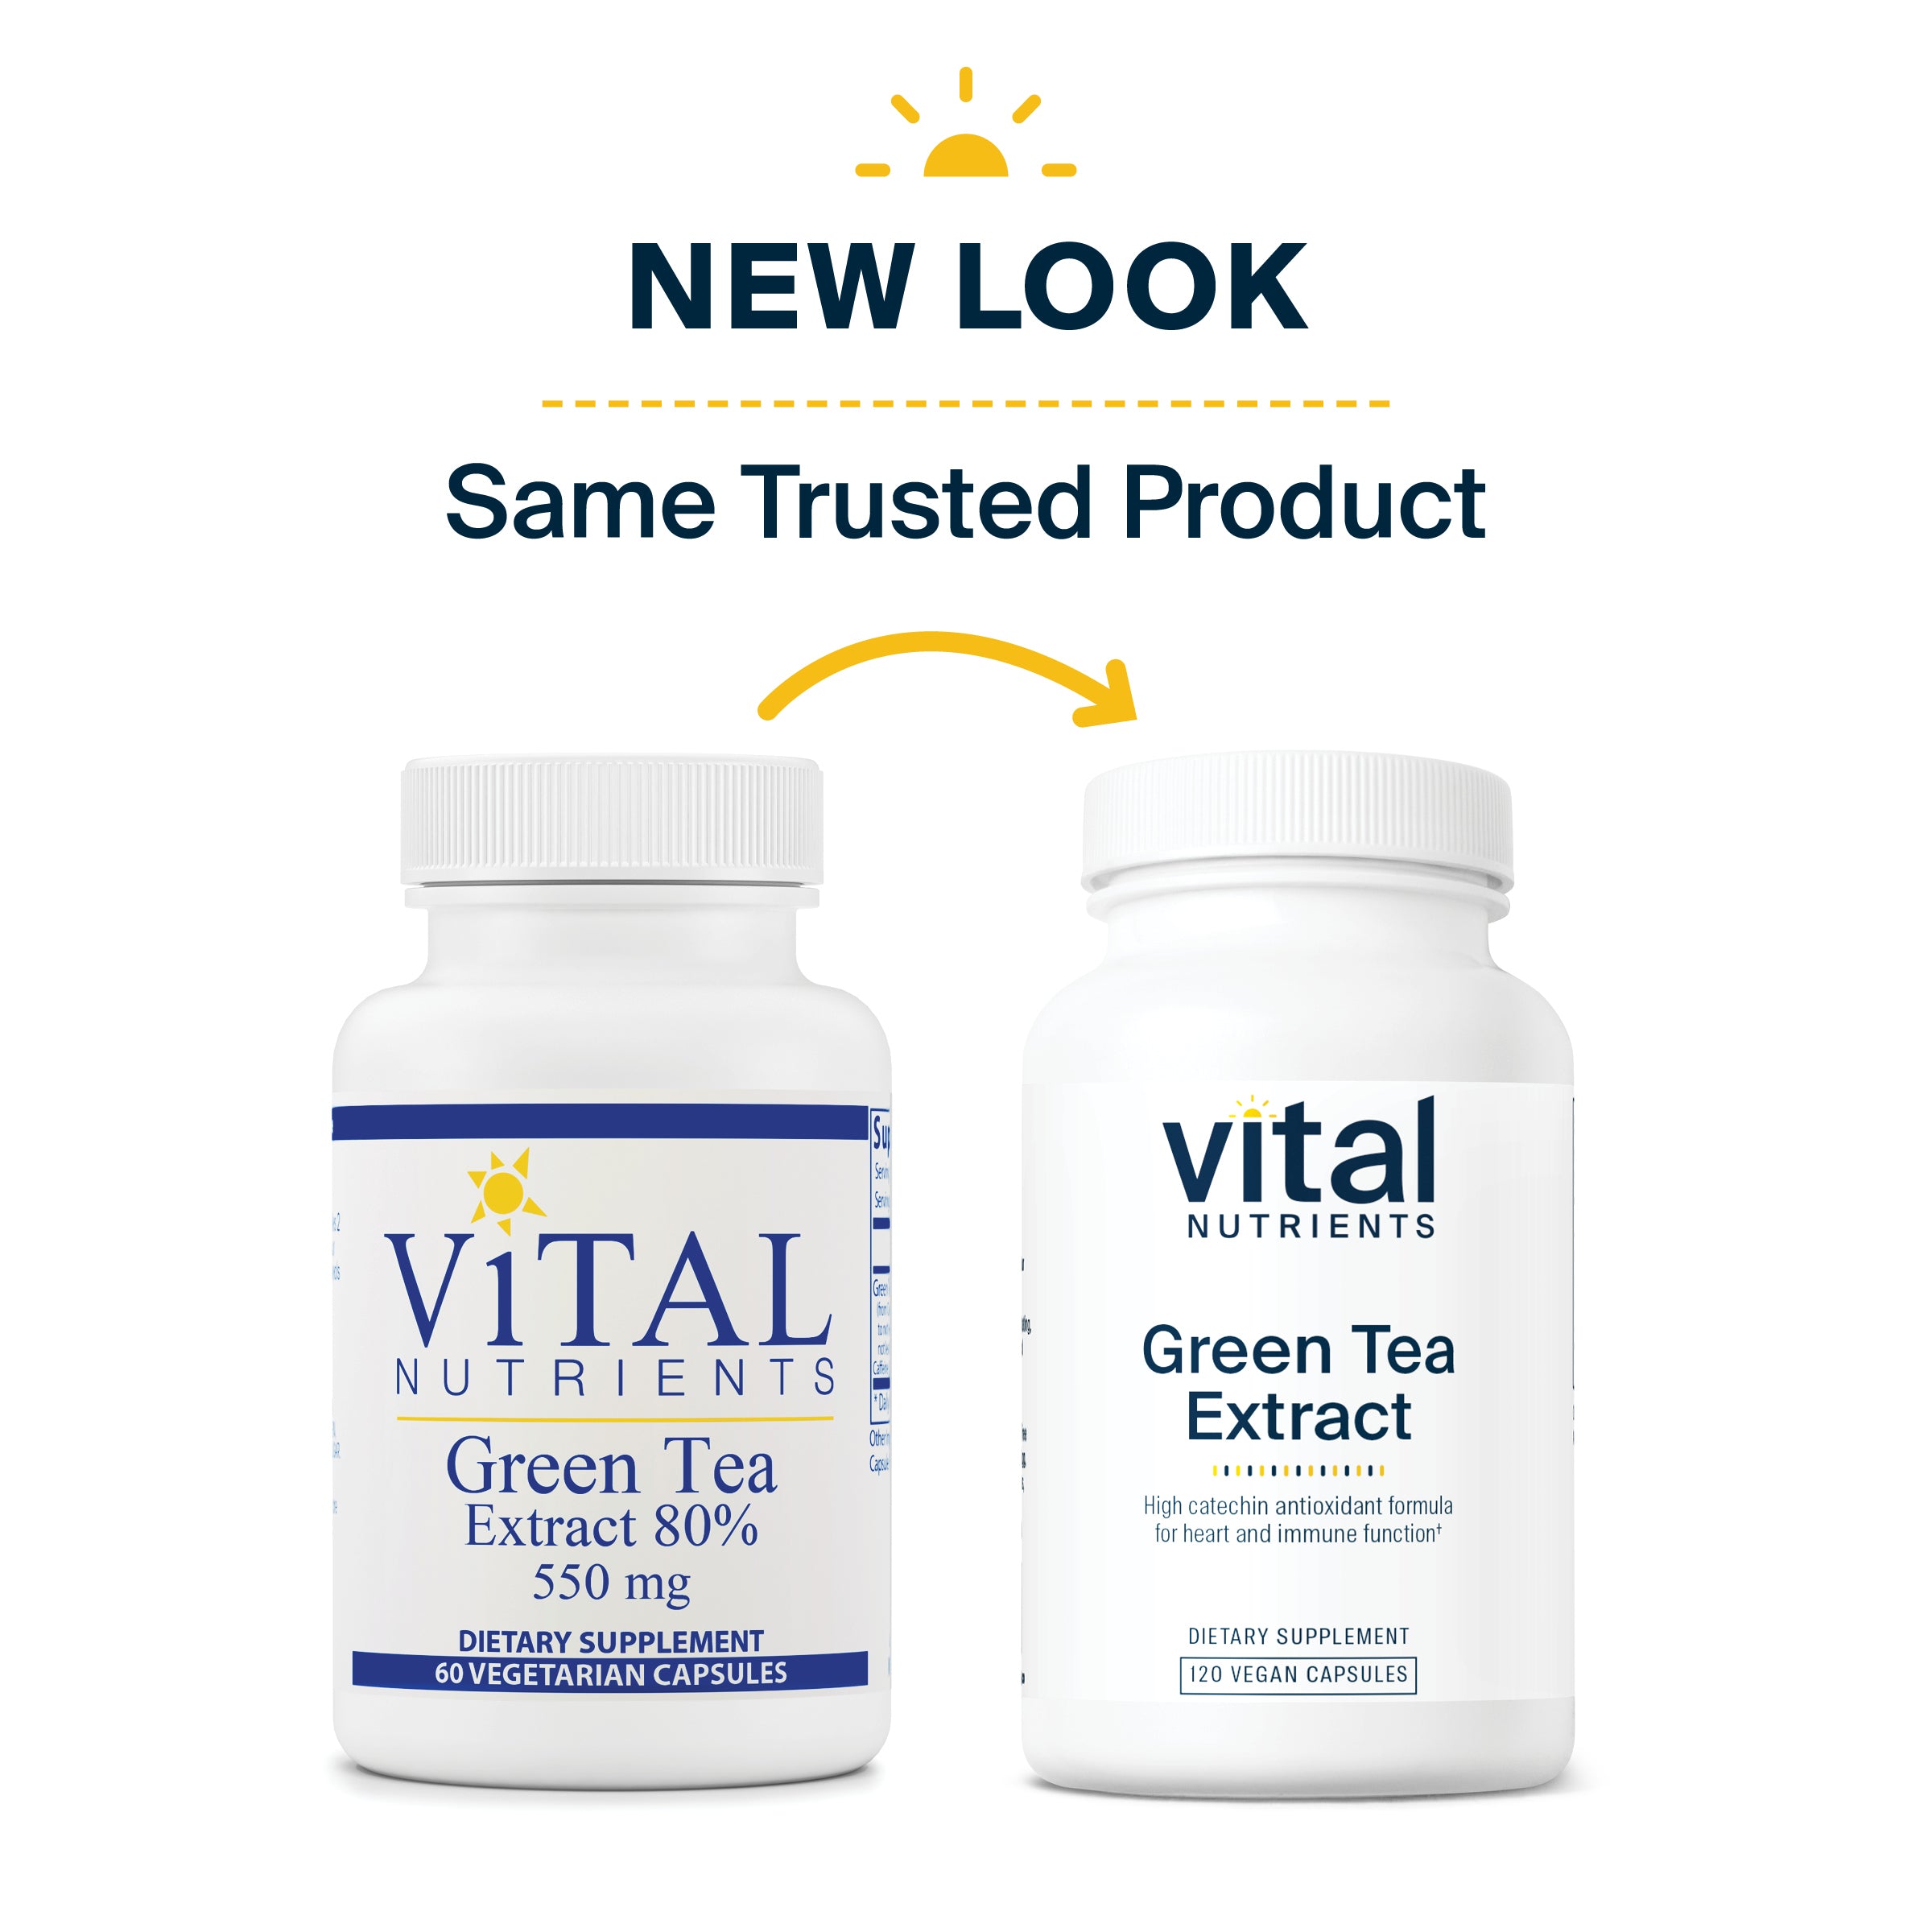 New look, same trusted product Vital Nutrients Green Tea Extract